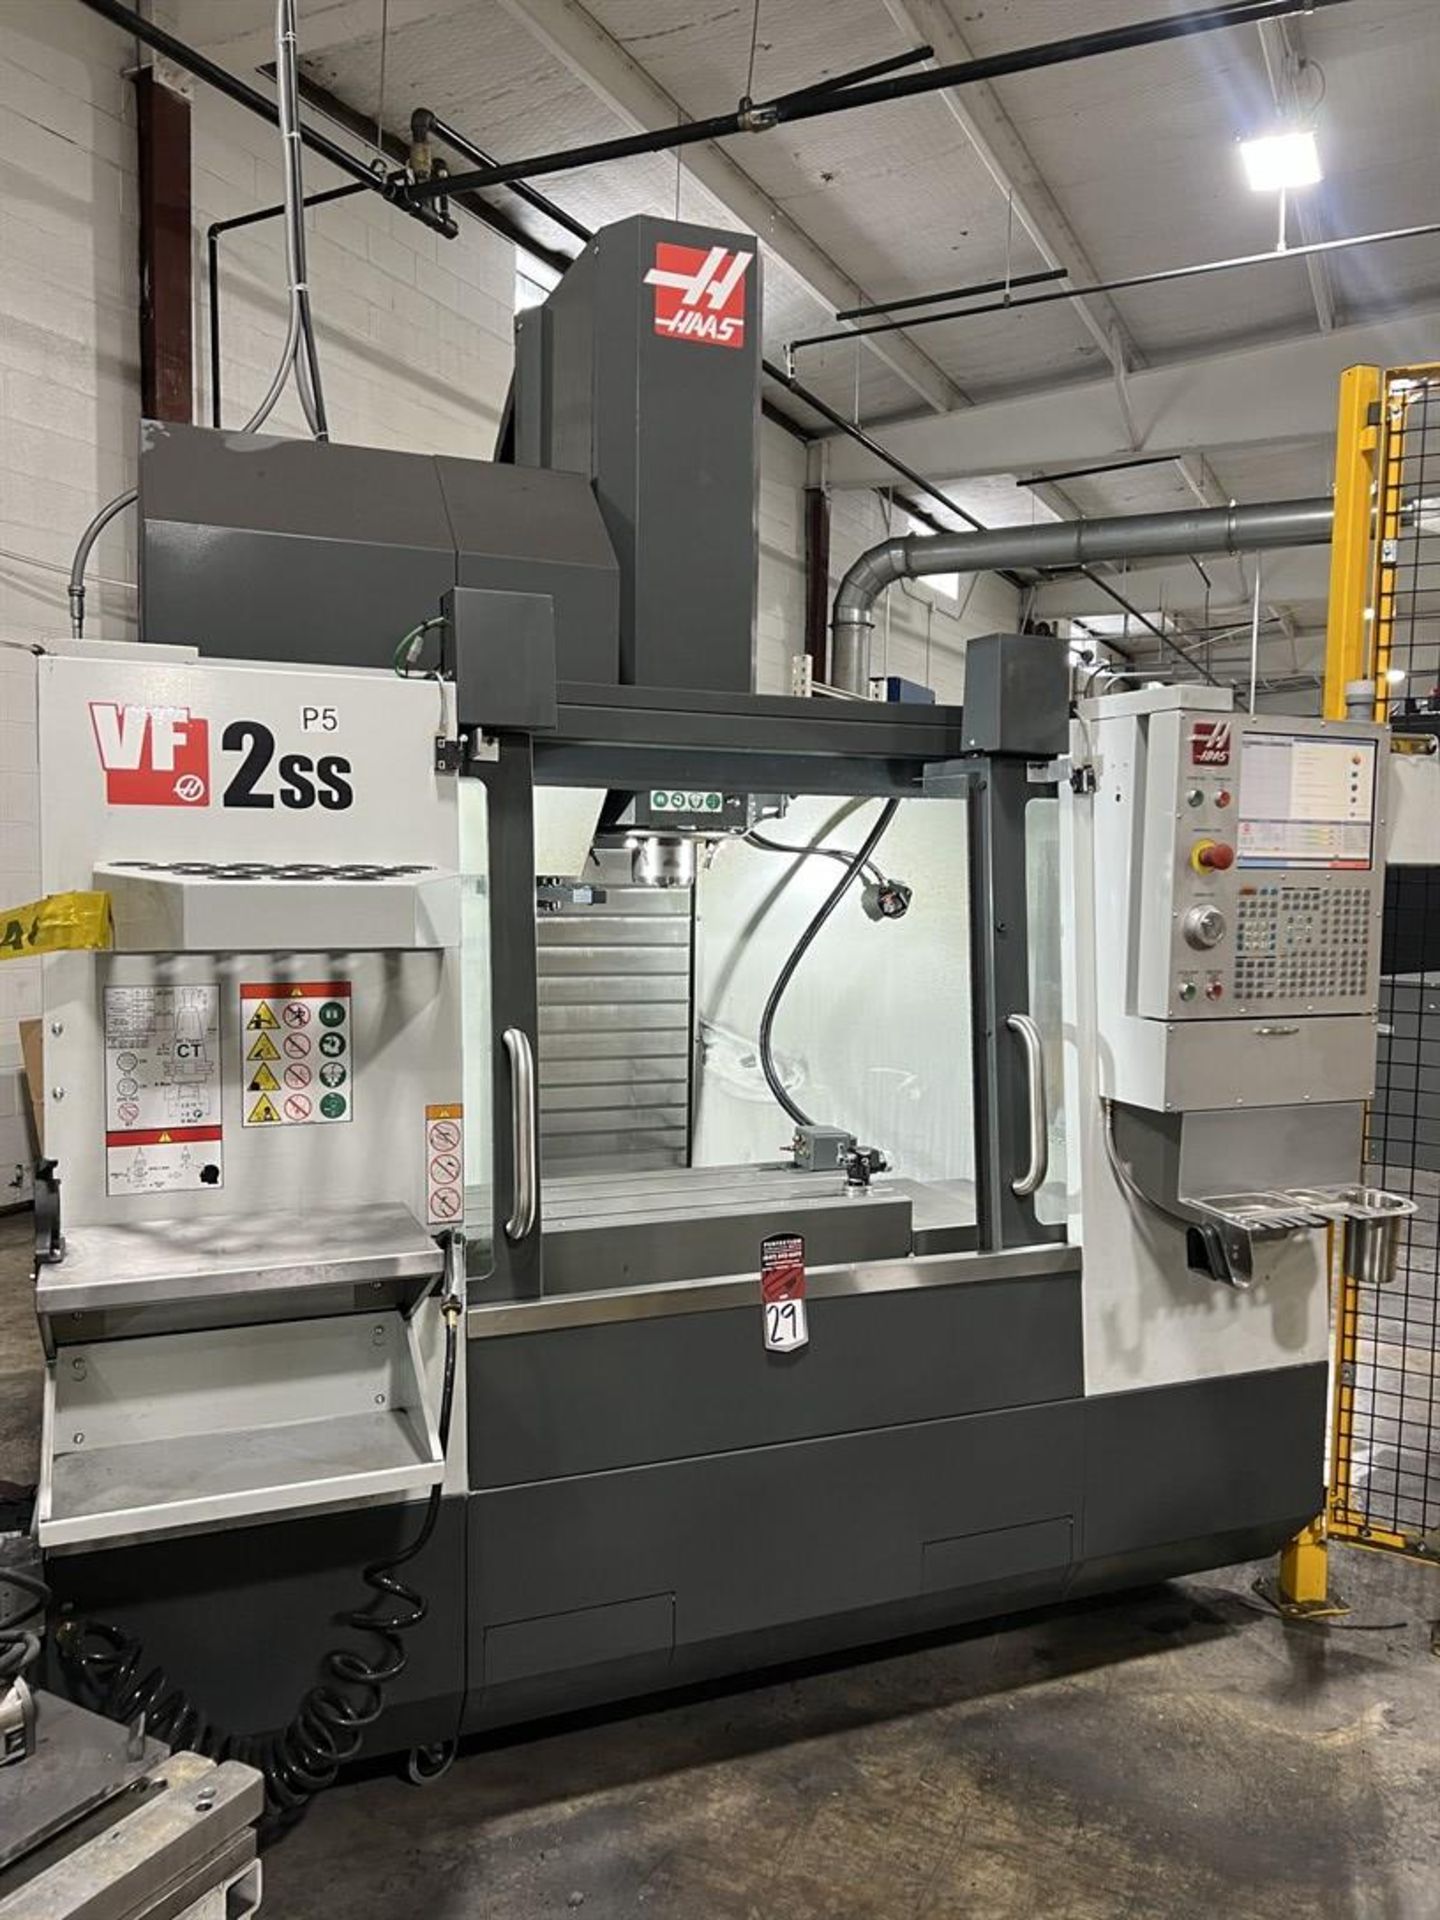 2020 HAAS VF-2SS Vertical Machining Center, s/n 1177544, 30"X, 16"Y, 20"Z, 36" x 14" Table, 4-24"